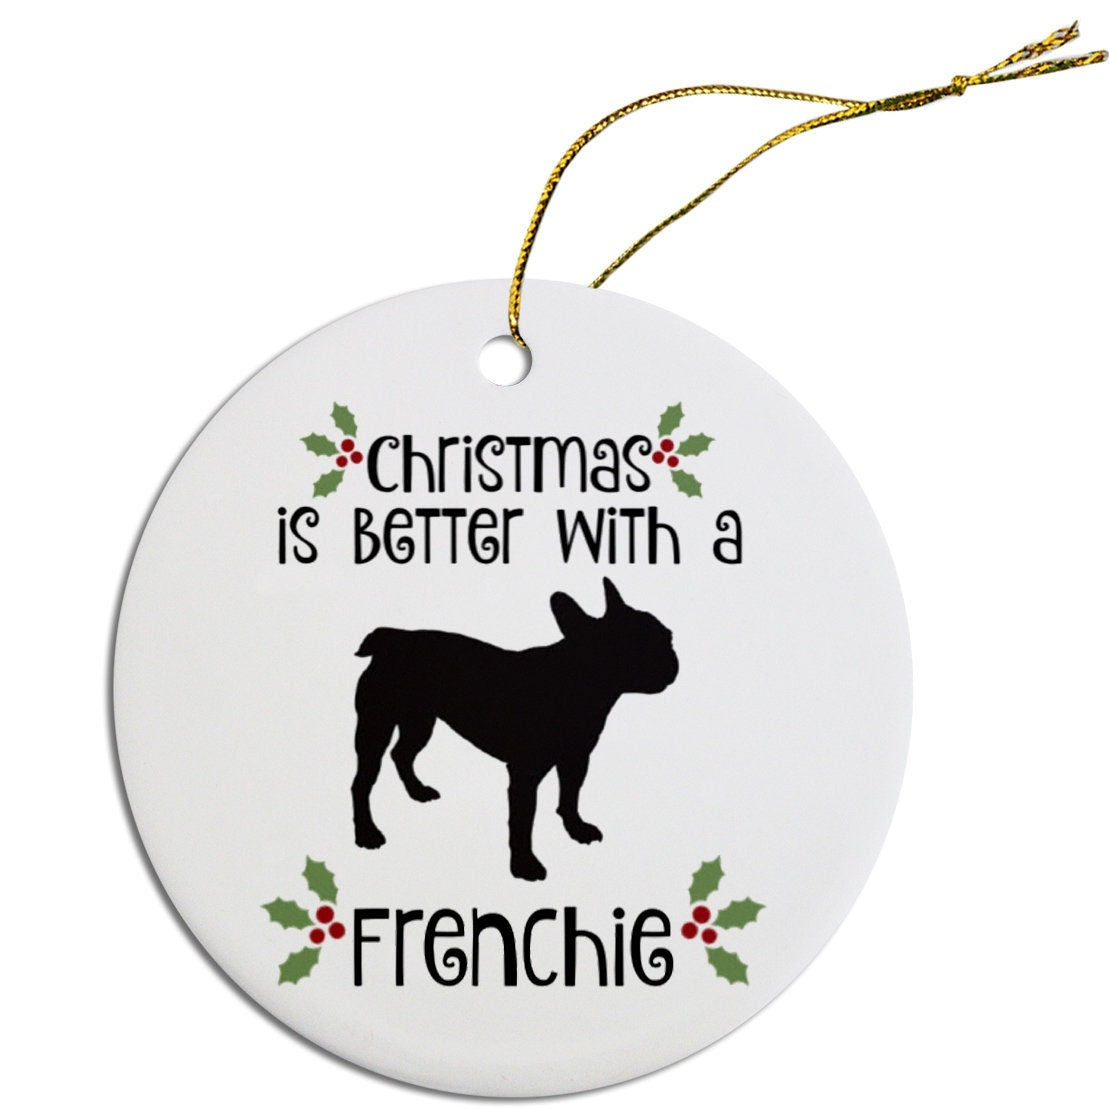 Dog Breed Specific Round Christmas Ornament, "Frenchie"